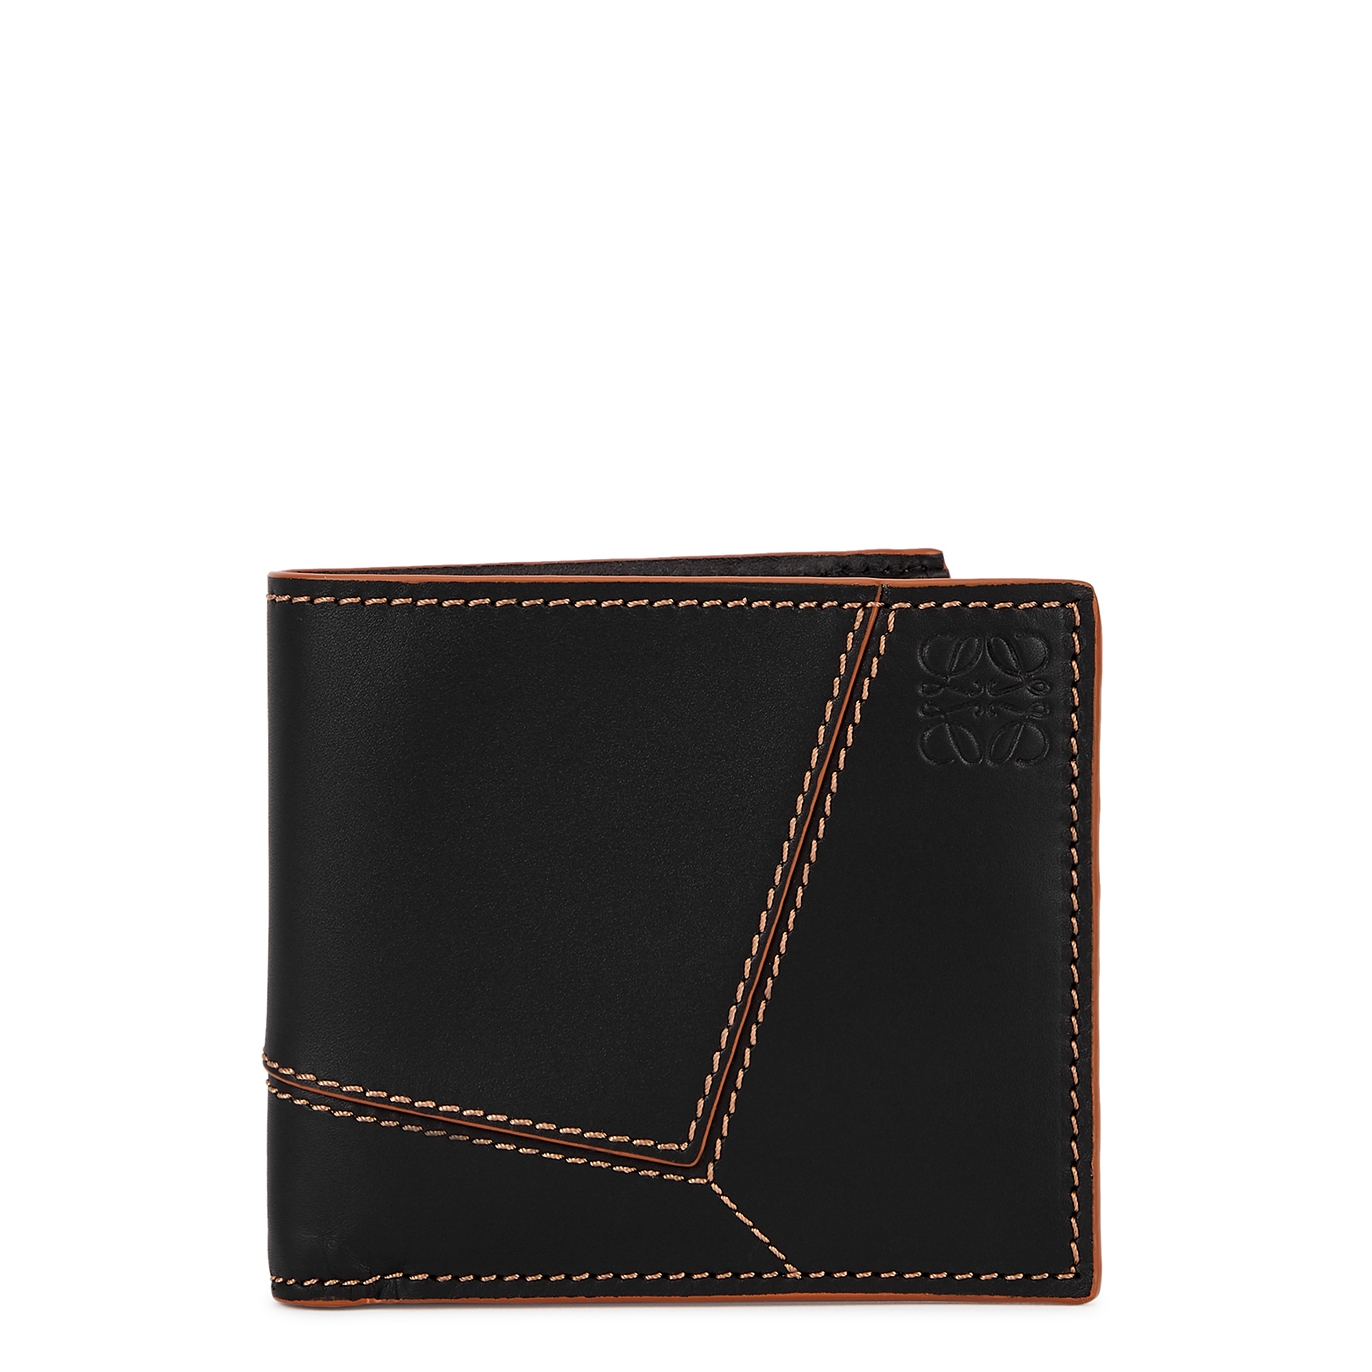 Loewe Puzzle Leather Wallet - Black - One Size